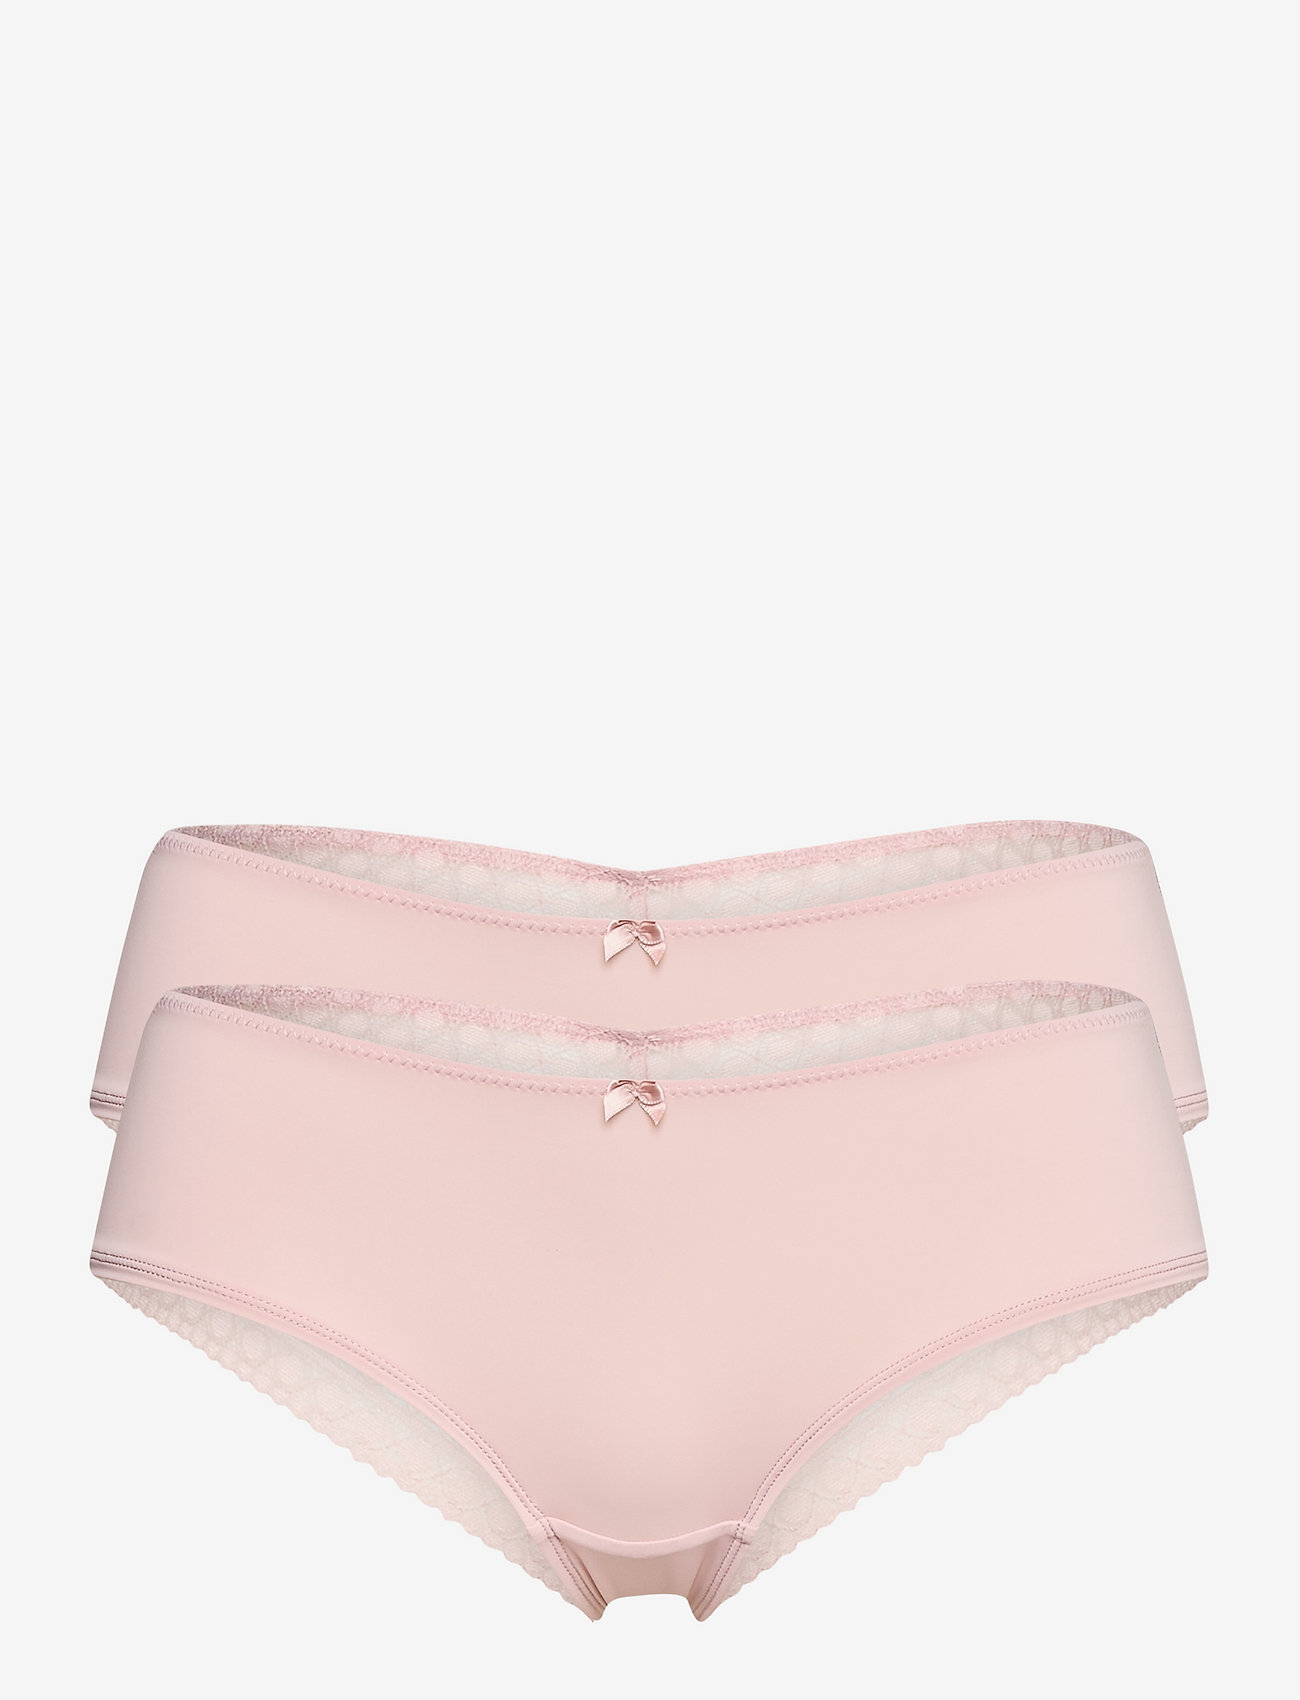 Esprit Bodywear Women - Double pack: Brazilian hipster shorts trimmed with lace - alhaisimmat hinnat - old pink - 0